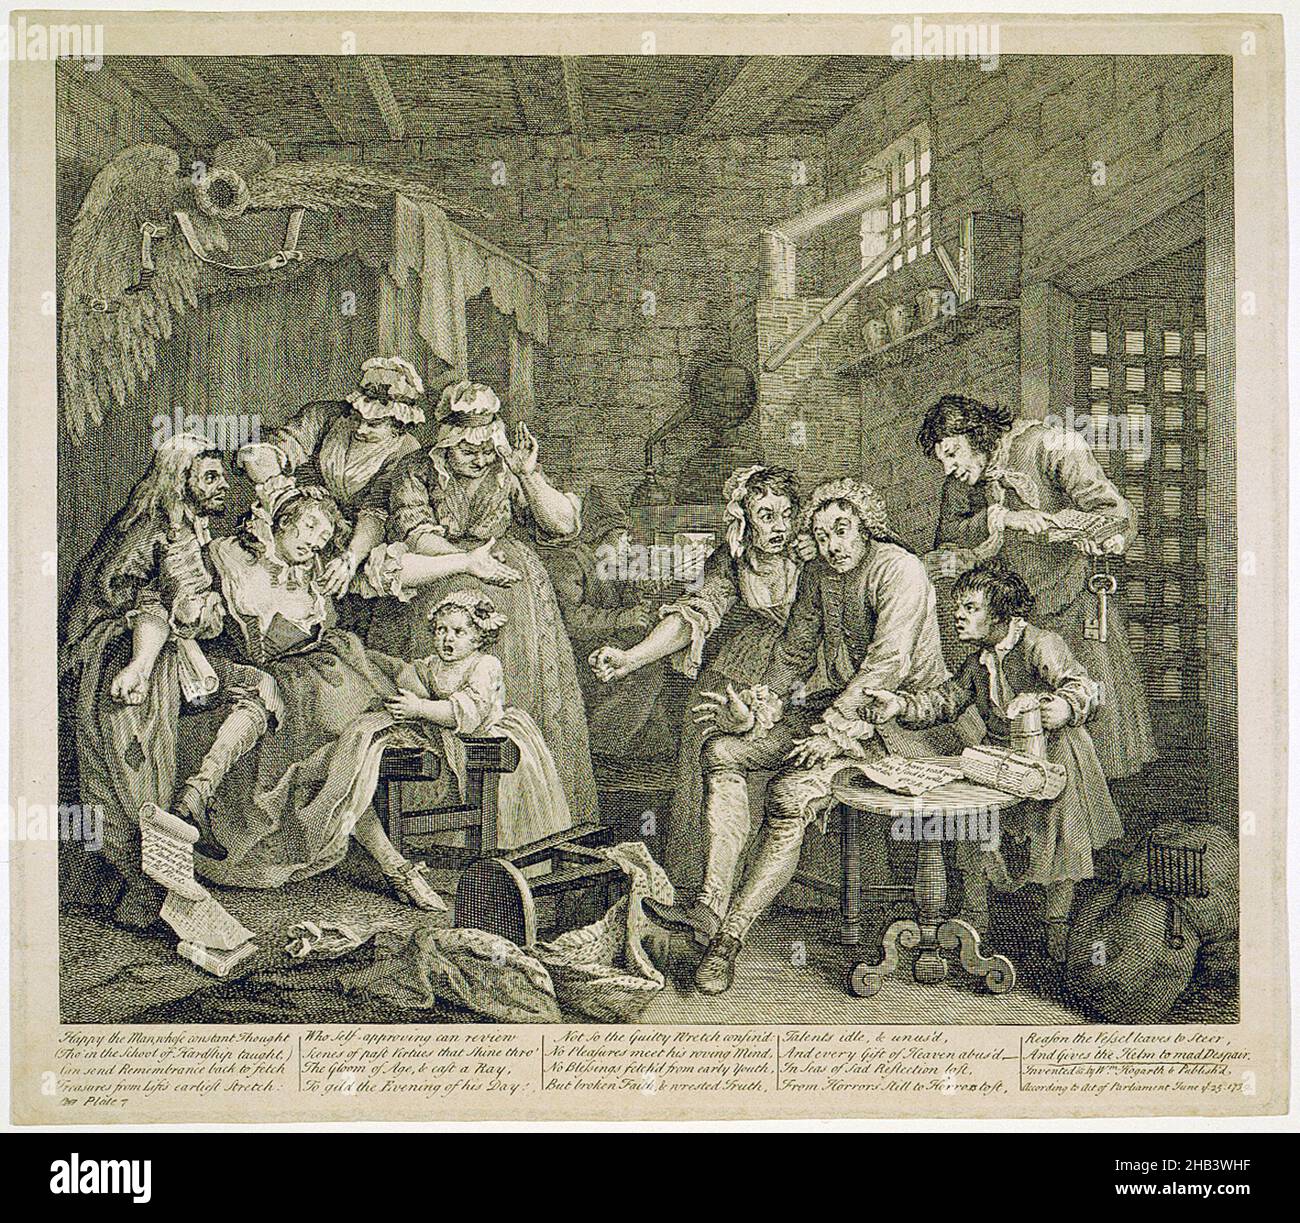 A rake's progress. Plate 7. The prison, William Hogarth, 1735, engraving, A Rake's Progress is a series of eight paintings by William Hogarth. The canvases were produced in 1732-33, then engraved and published as engravings in 1735. Stock Photo